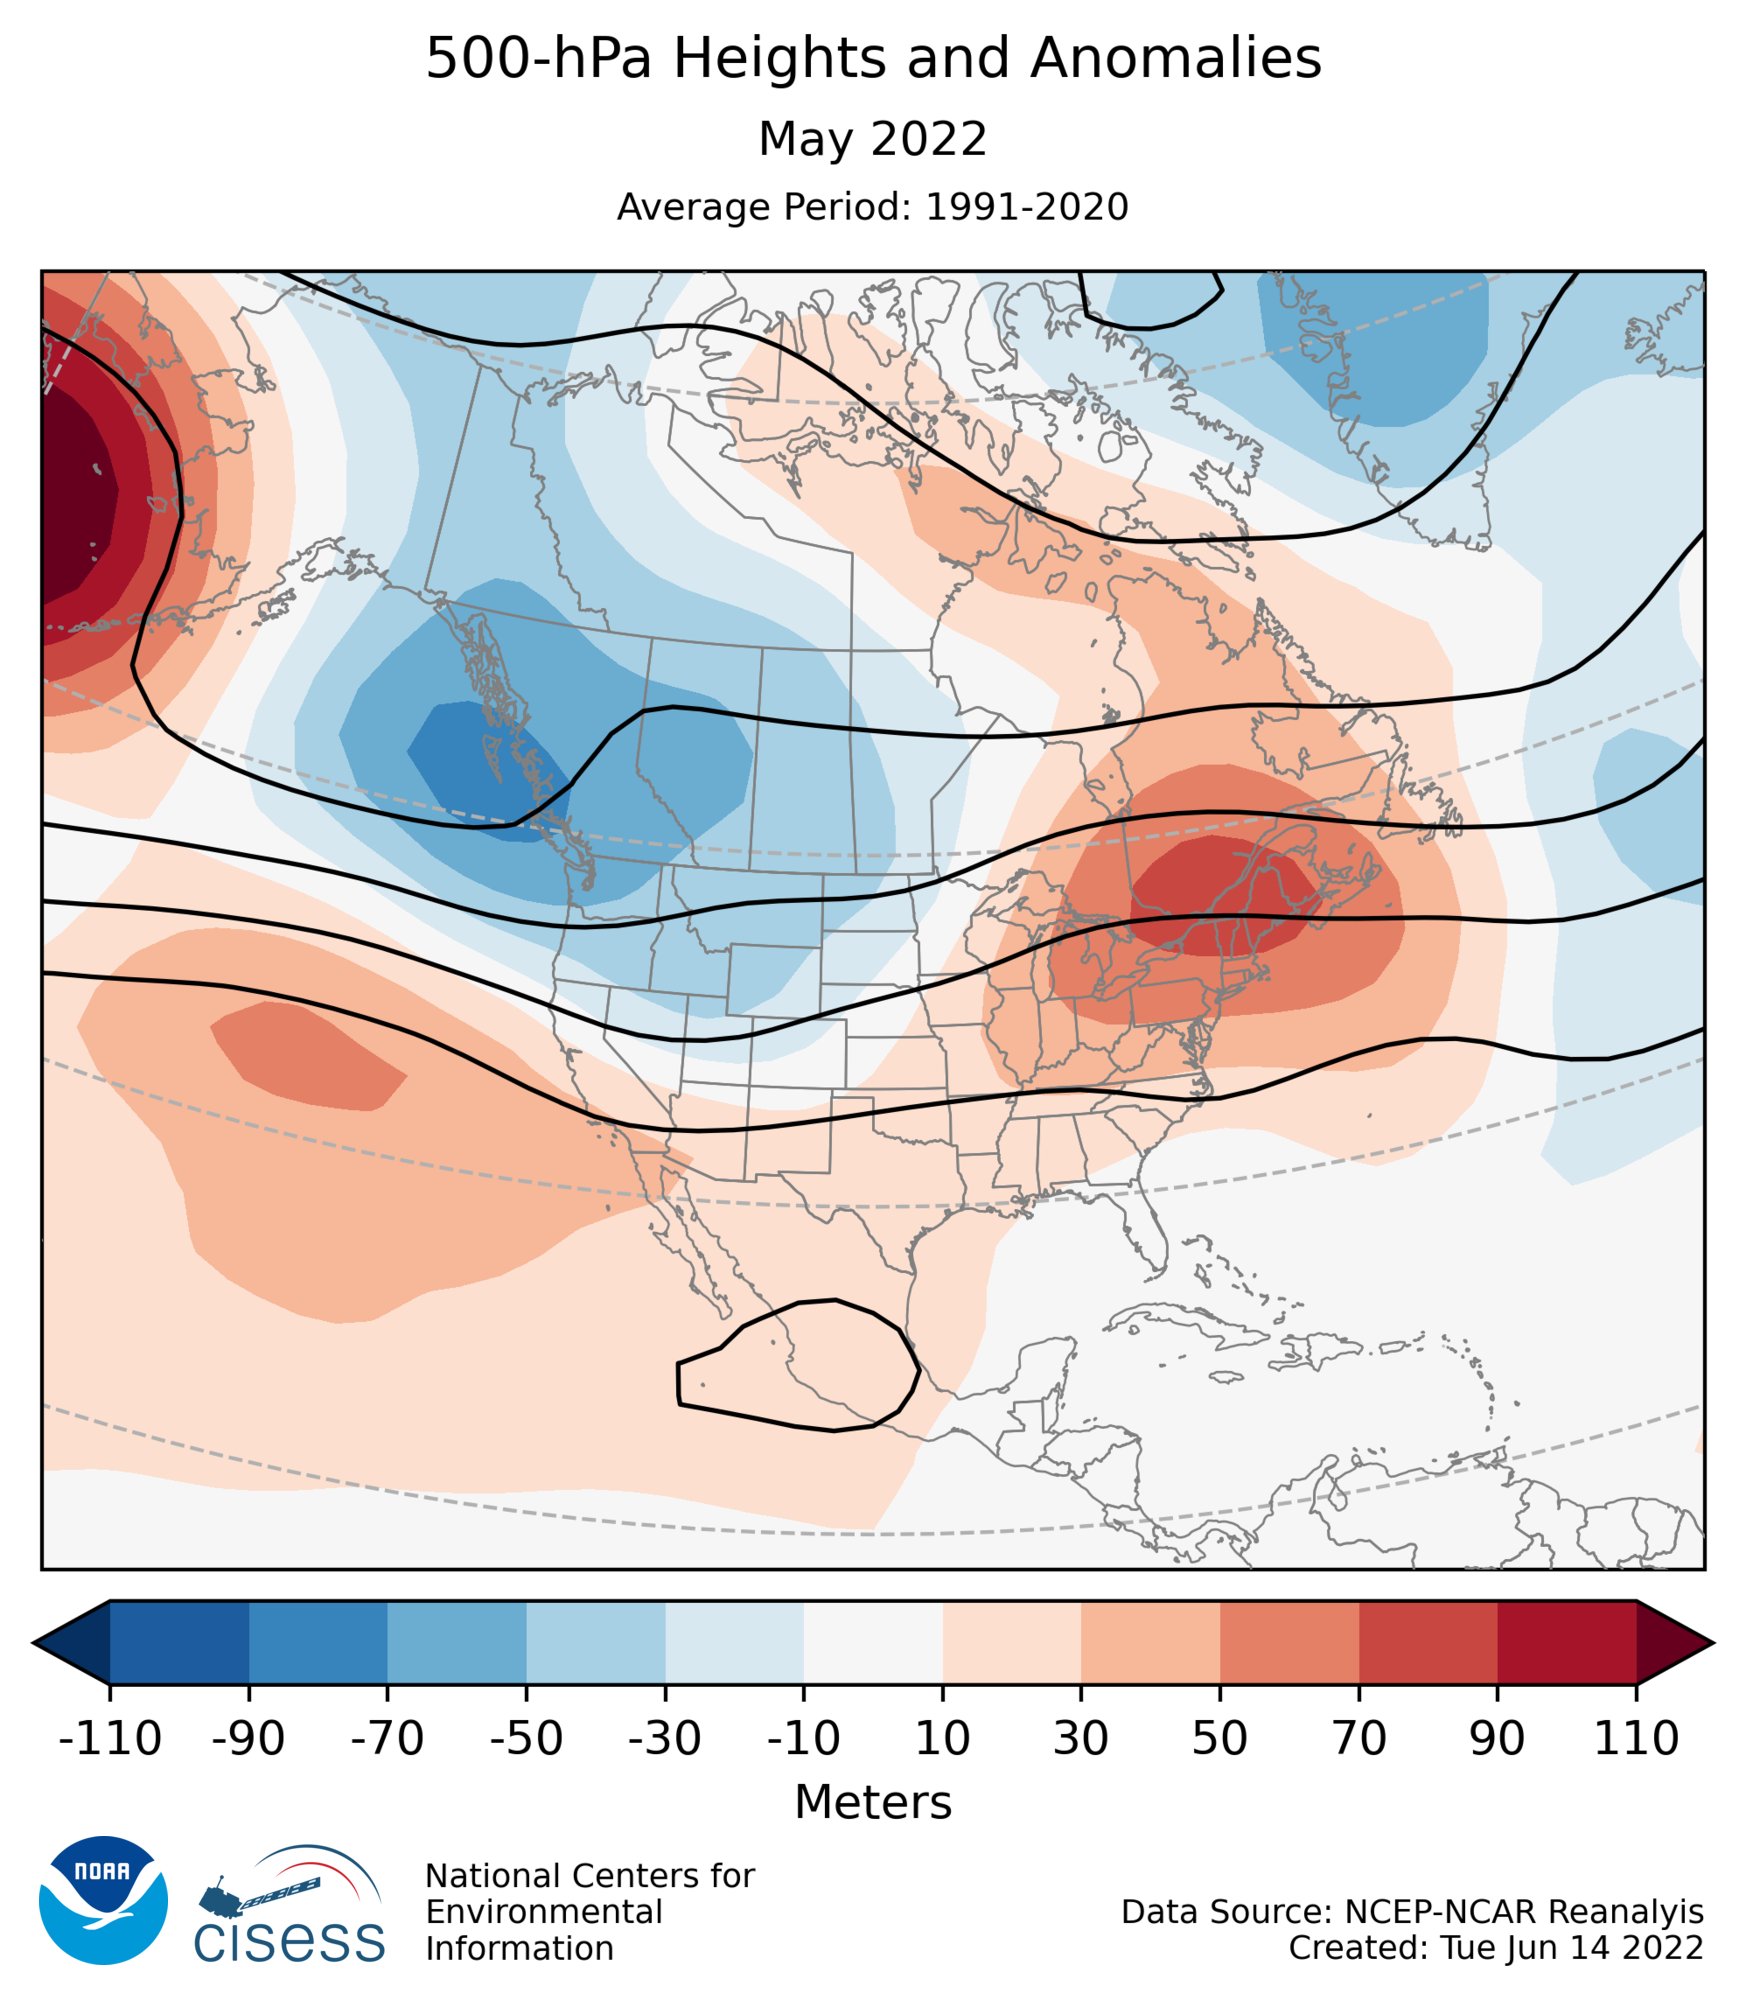 500-mb height mean (contours) and anomalies (shading) for North America for May 2022